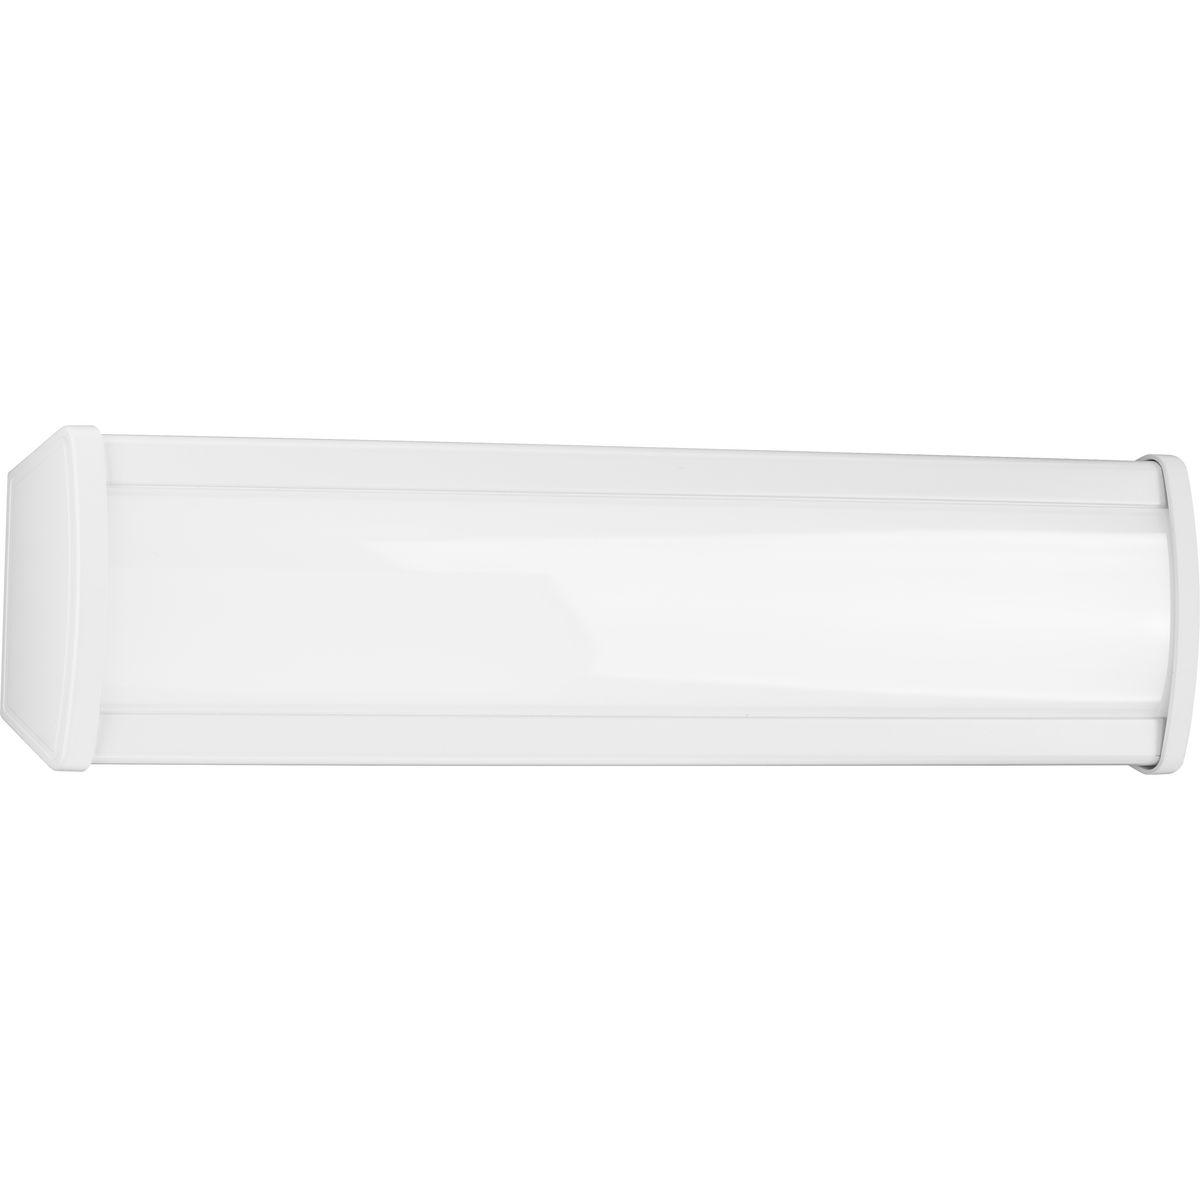 Hubbell P730011-030-30 The Wrap and Strip Collection's Two-Foot LED Wrap Light features a crisp white acrylic diffuser shaped into an elegant elongated tubular silhouette. The light fixture is complemented by white end caps and a white metal chassis. The wrap light can be mount